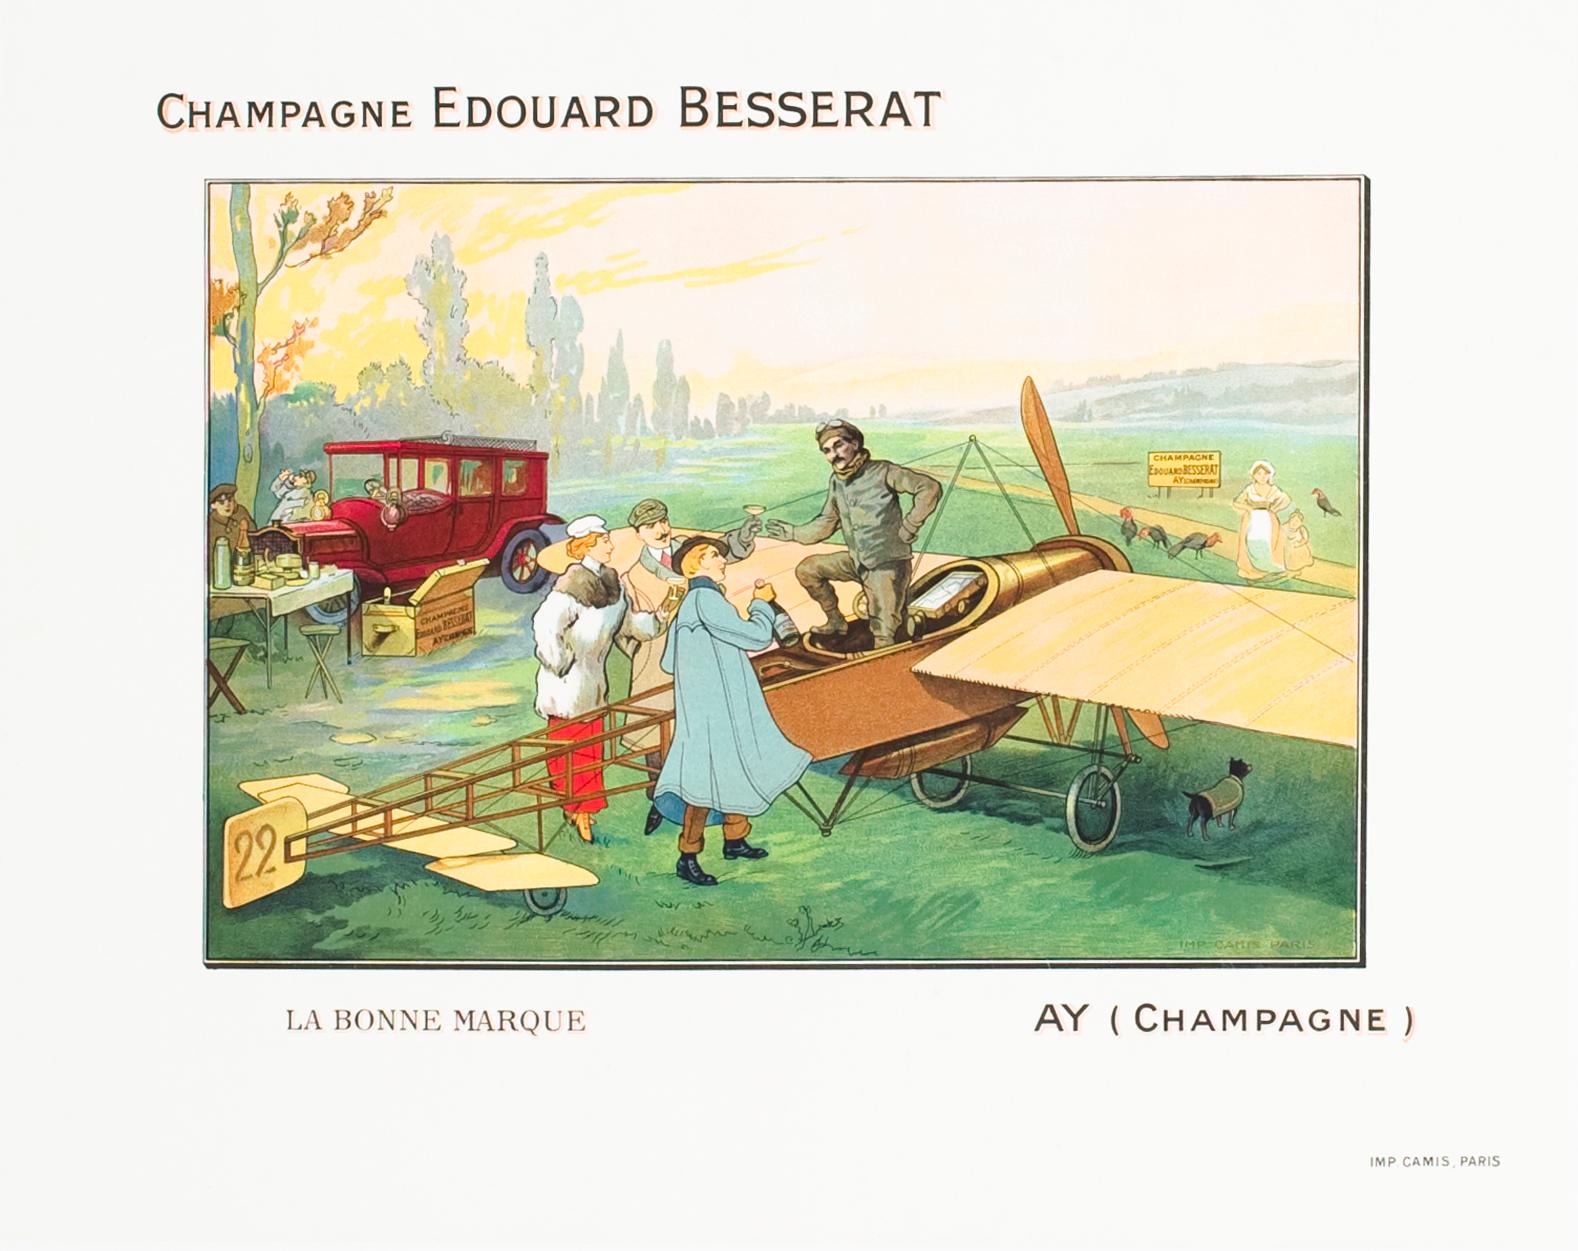 "Champagne Edouard Besserat" Original Vintage Champagne Poster - Print by Unknown